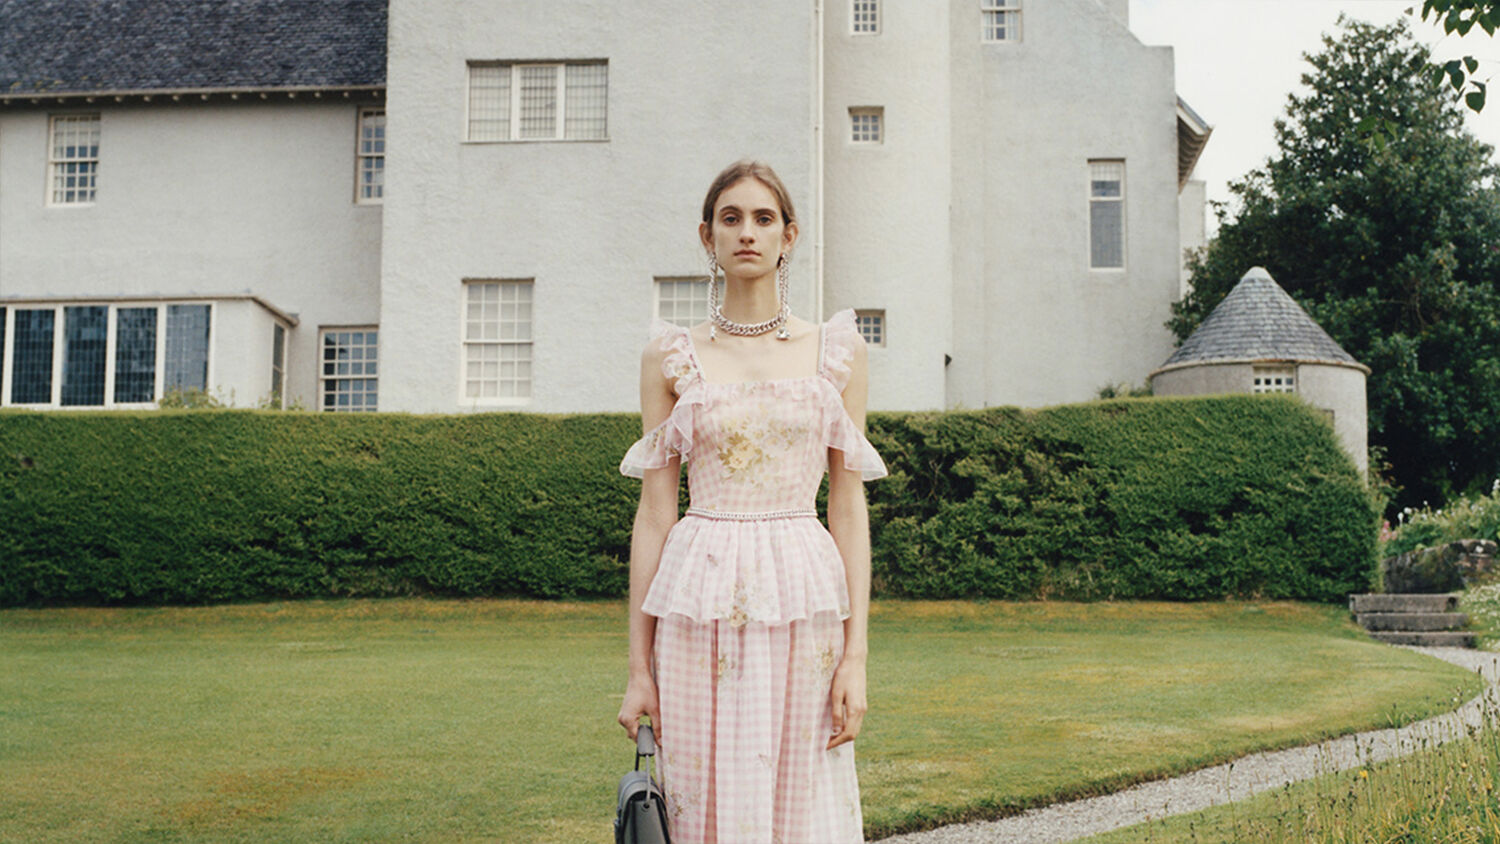 Hill House shines in fashion images | National Trust for Scotland